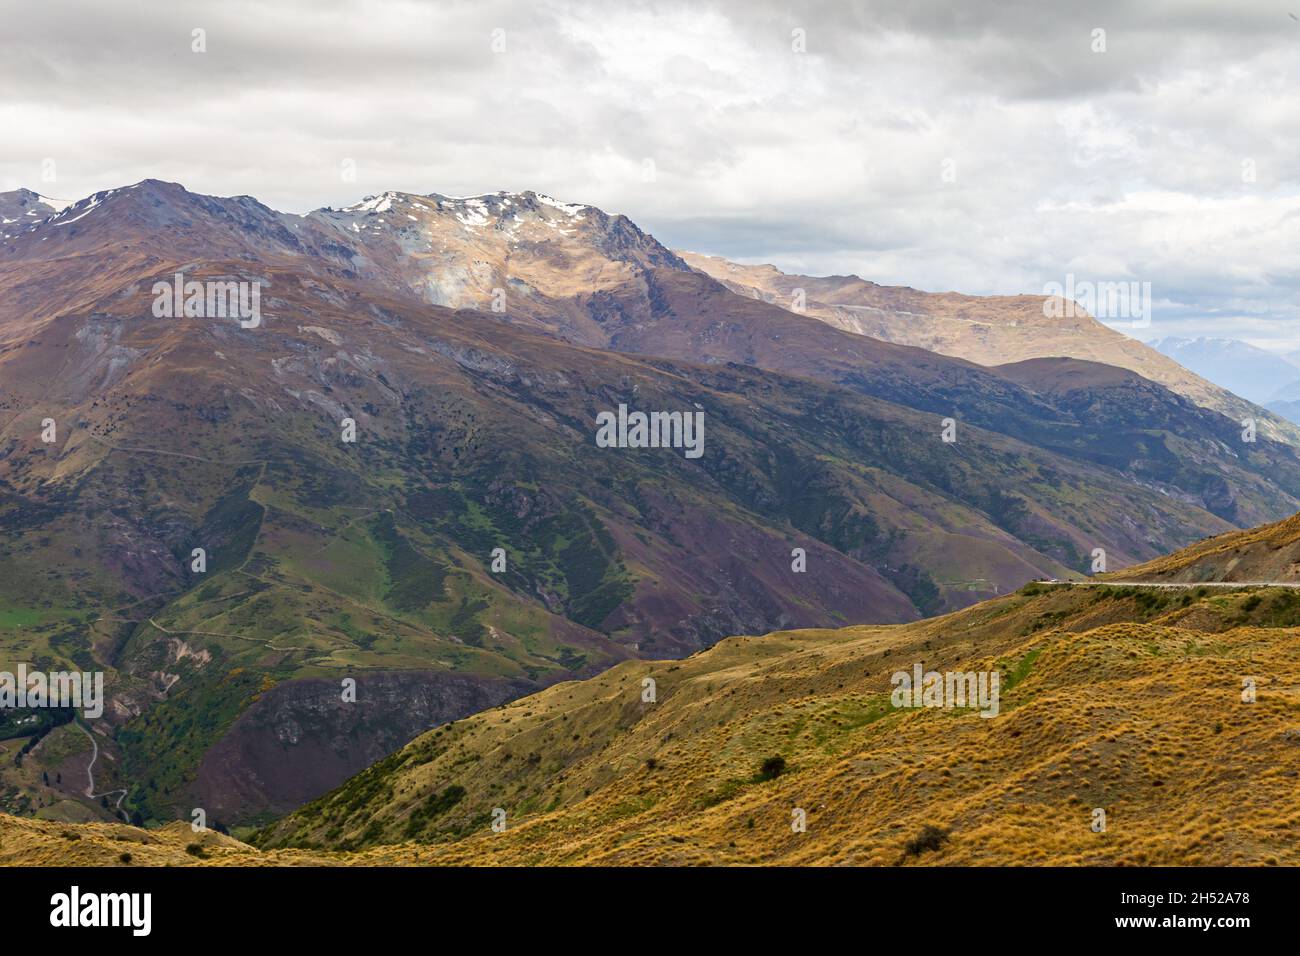 View of the hills and mountains of the South Island. New Zealand Stock Photo